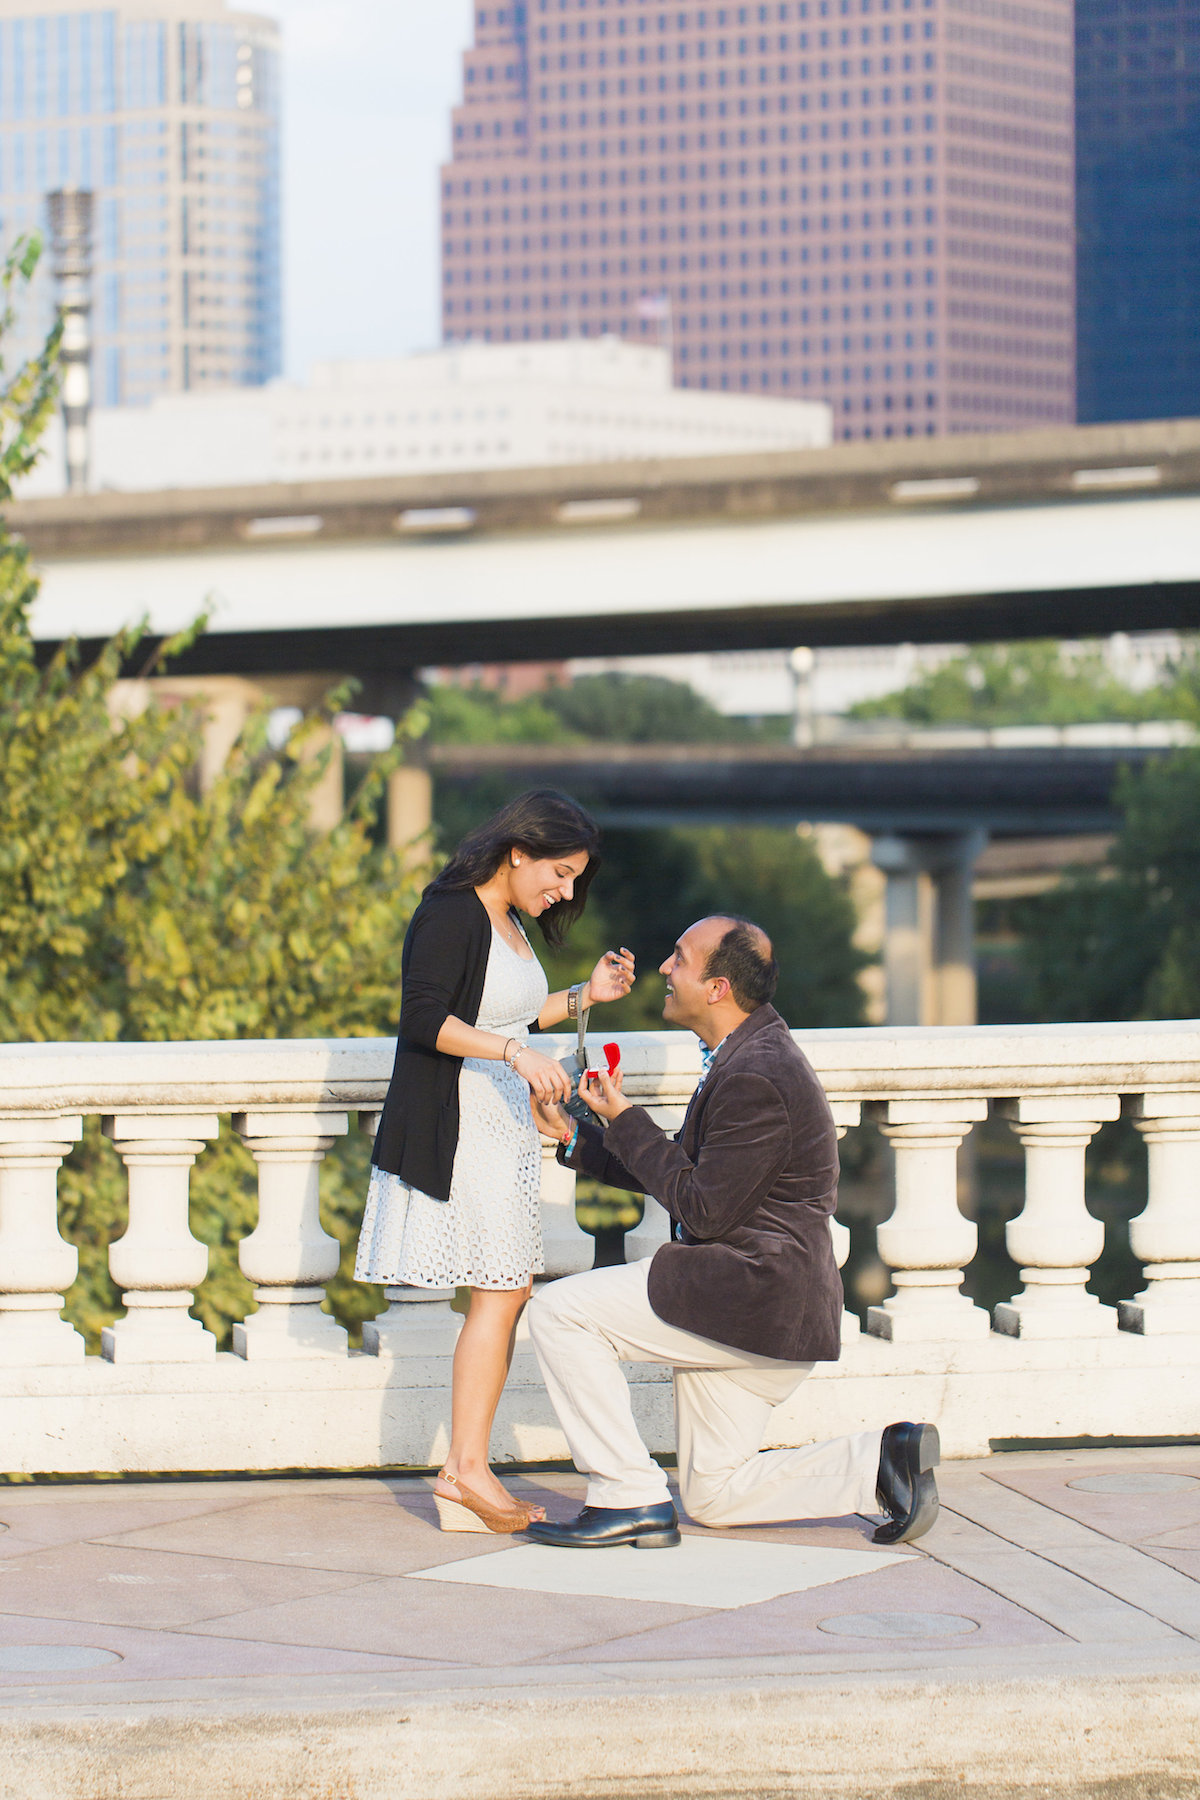 View More: http://michelleablephotography.pass.us/ankit-niti-proposal